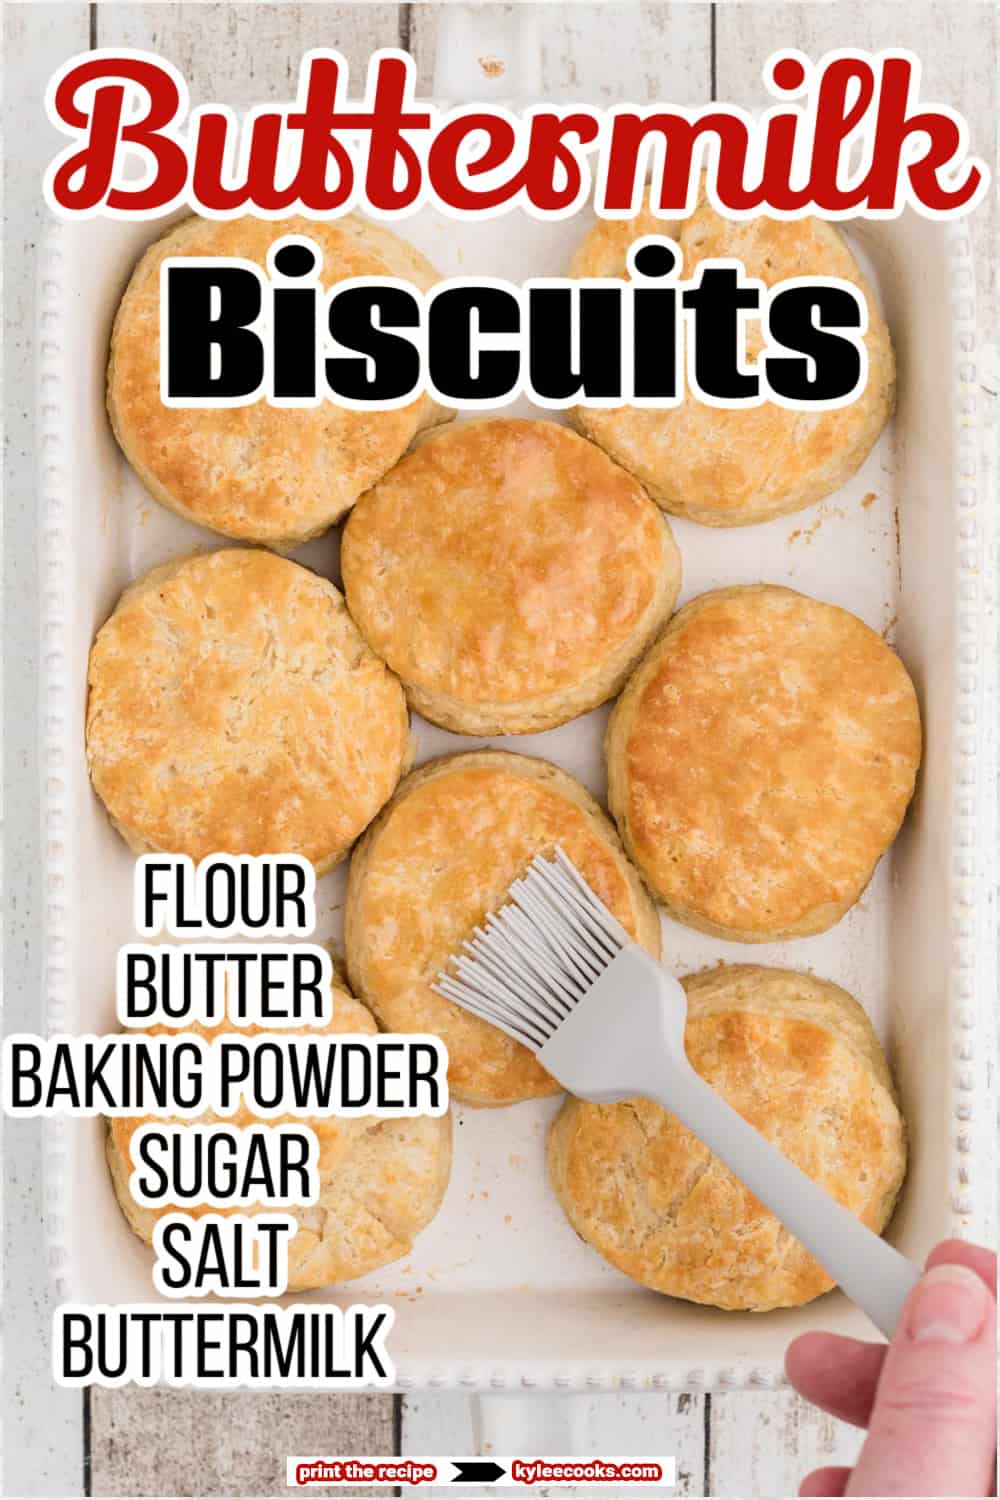 buttermilk biscuits being brushed with butter, with recipe name and ingredients overlaid in text.